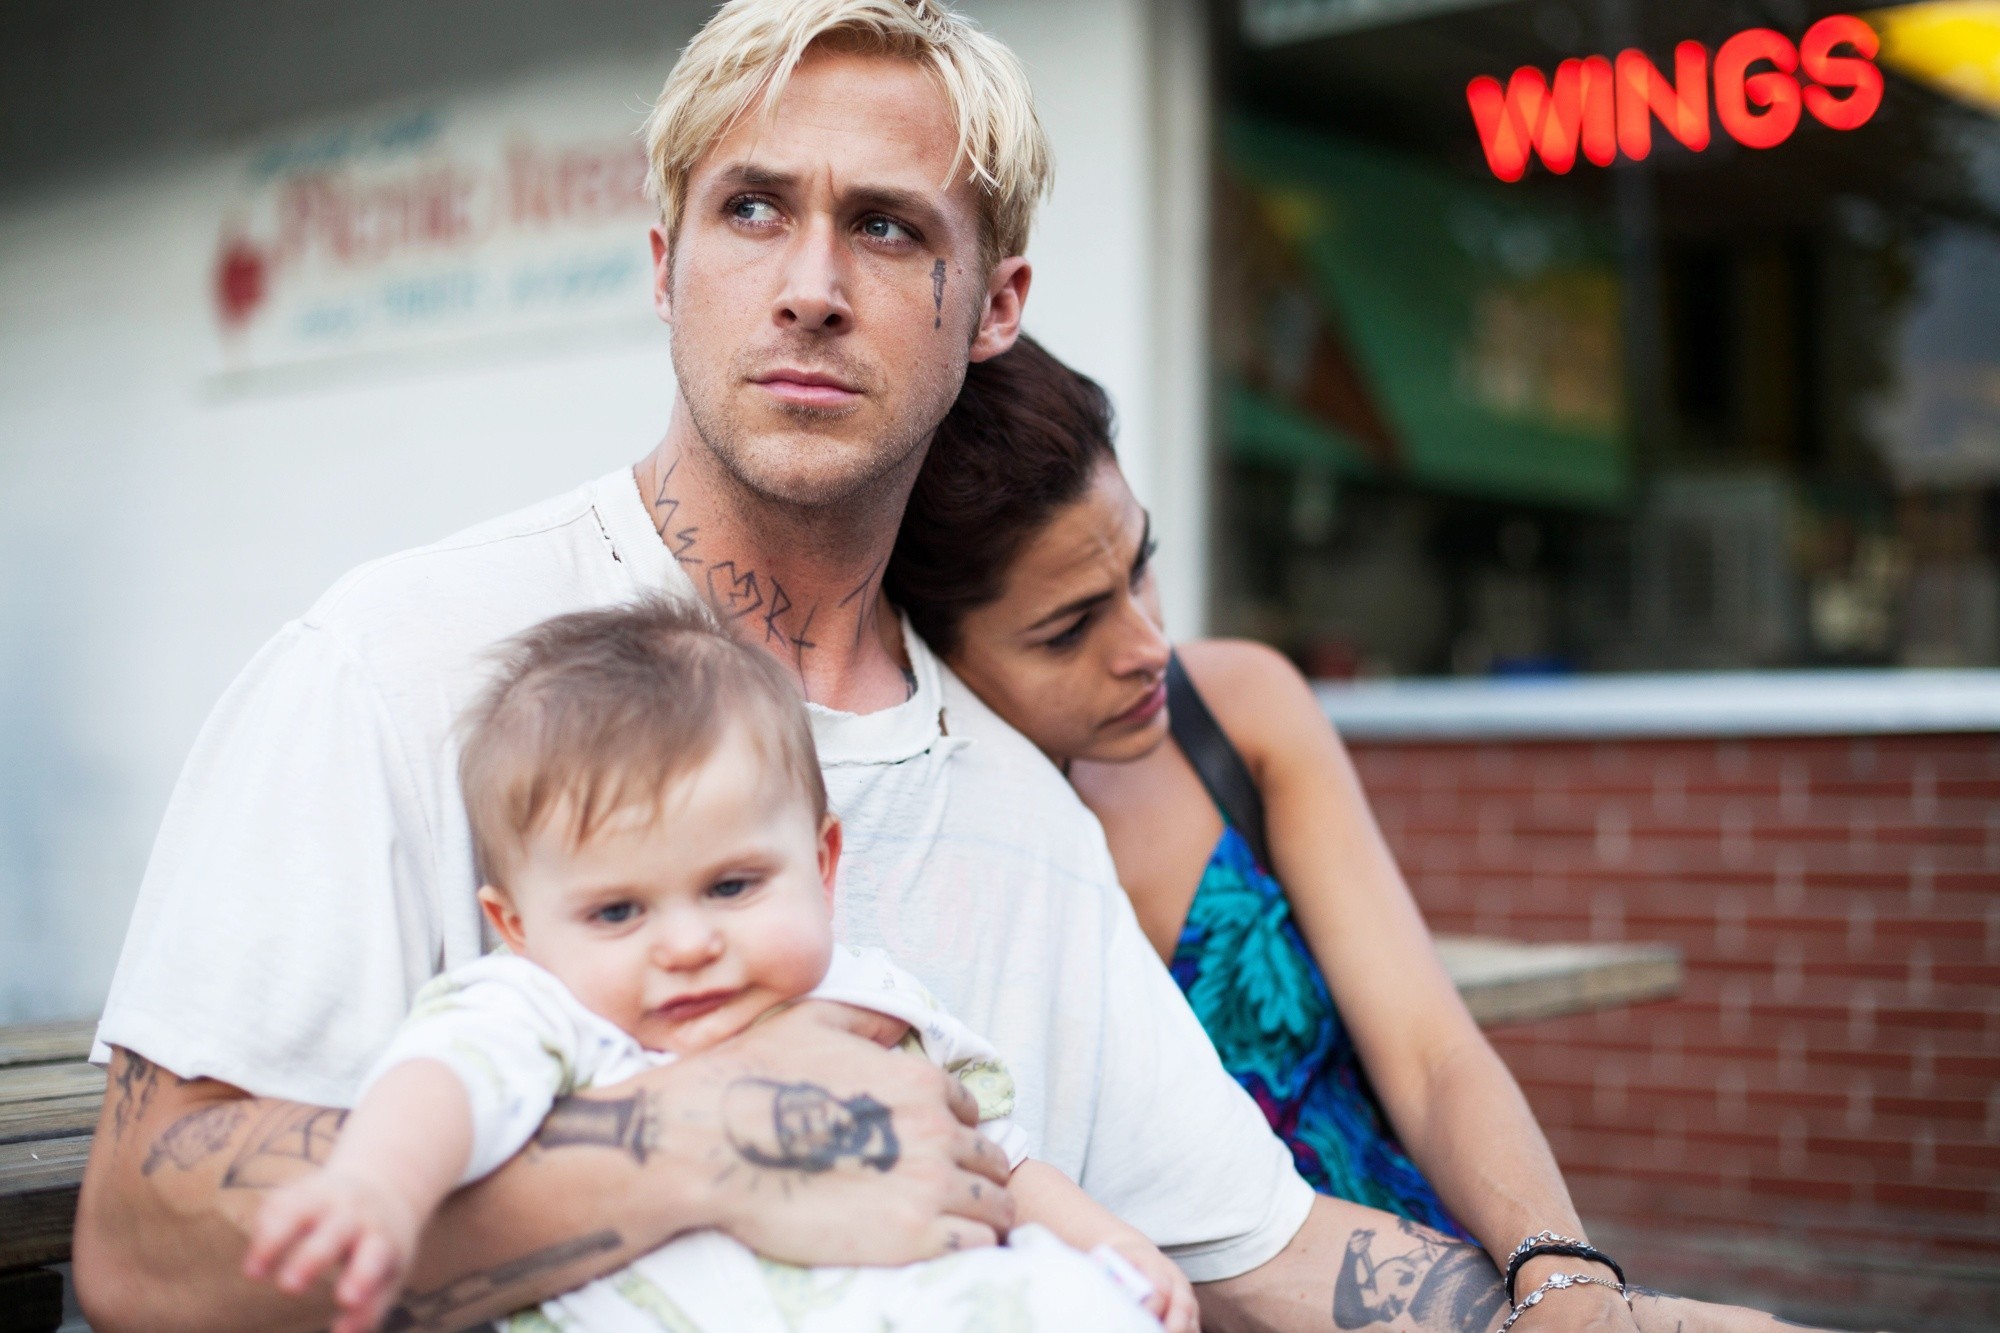 Ryan Gosling stars as Luke and Eva Mendes stars as Romina in Focus Features' The Place Beyond the Pines (2013). Photo credit by Atsushi Nishijima.